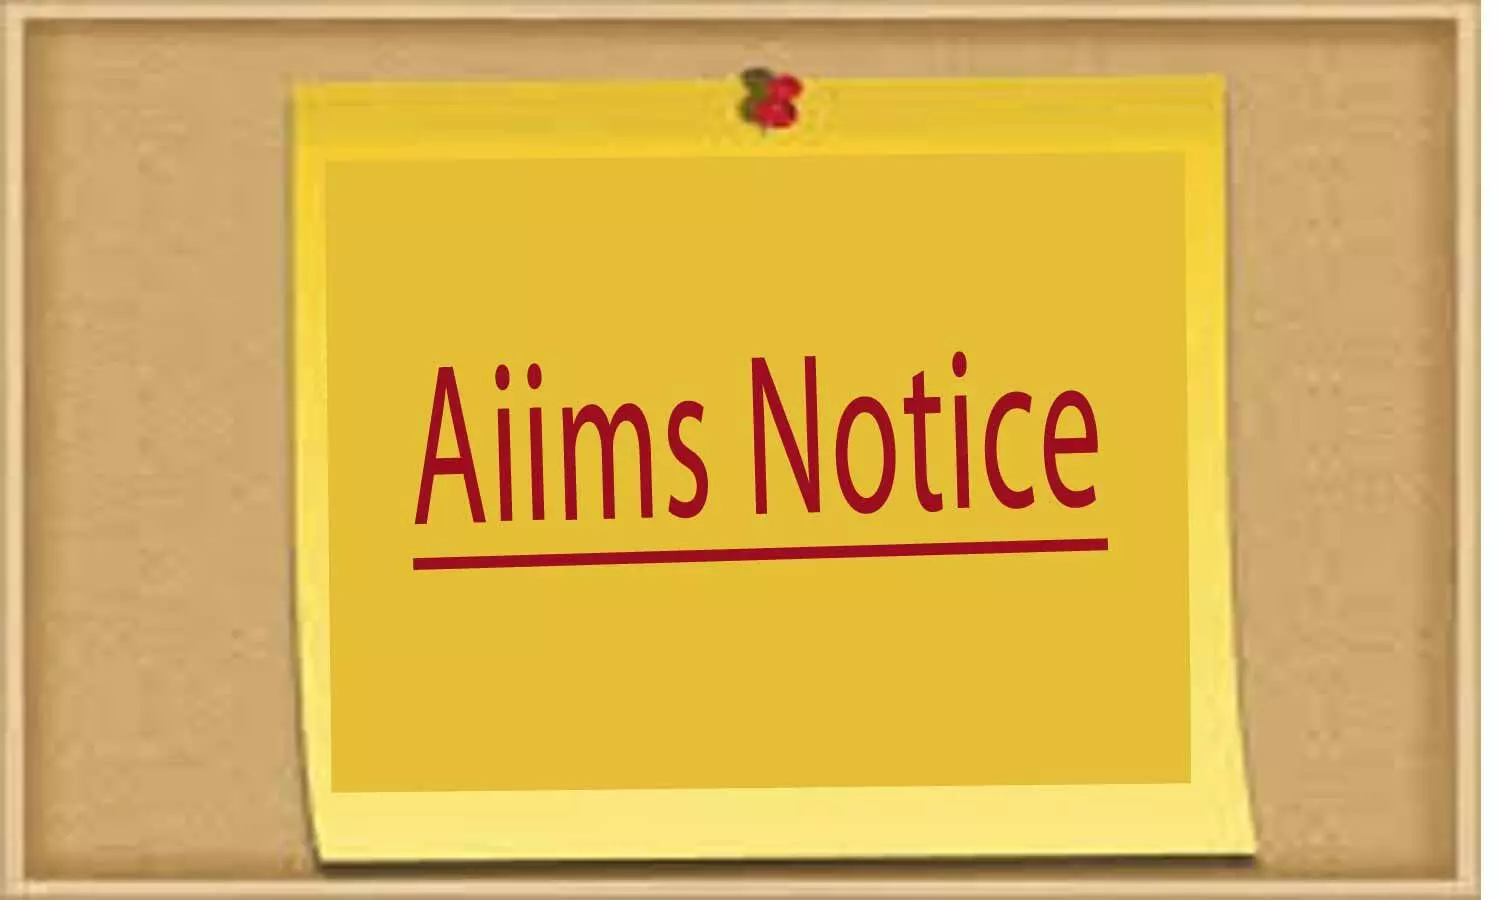 AIIMS notifies on Revised seat position for MCh (Breast Endocrine & General Surgery) January 2021 session